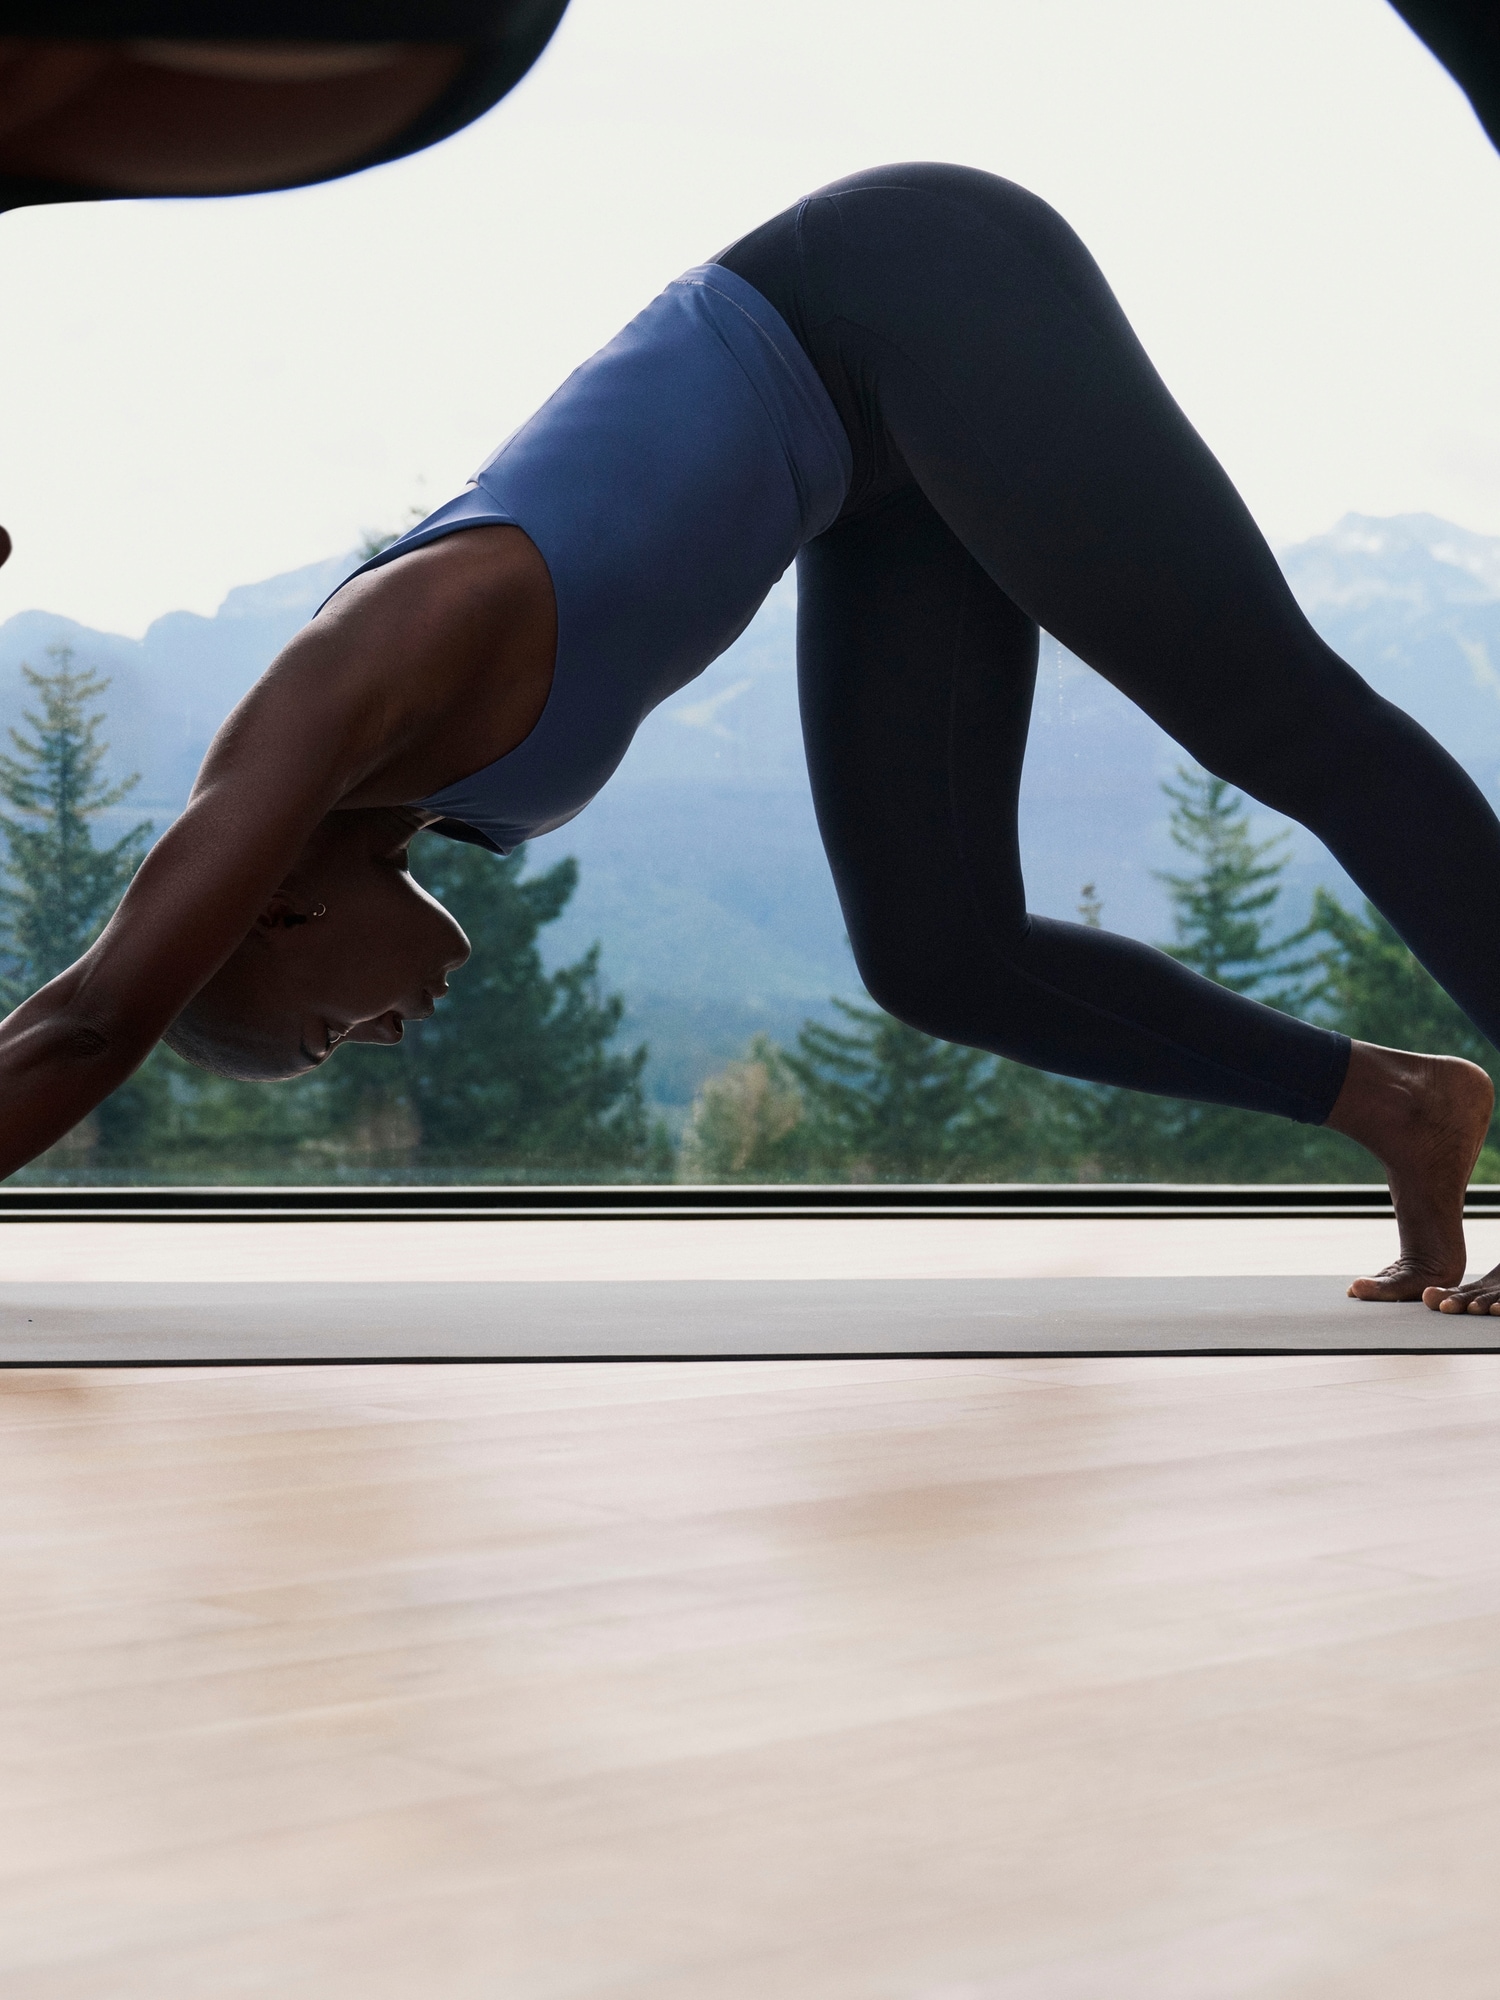 Athleta's Transcend Tights Are Perfect For Summer Workouts